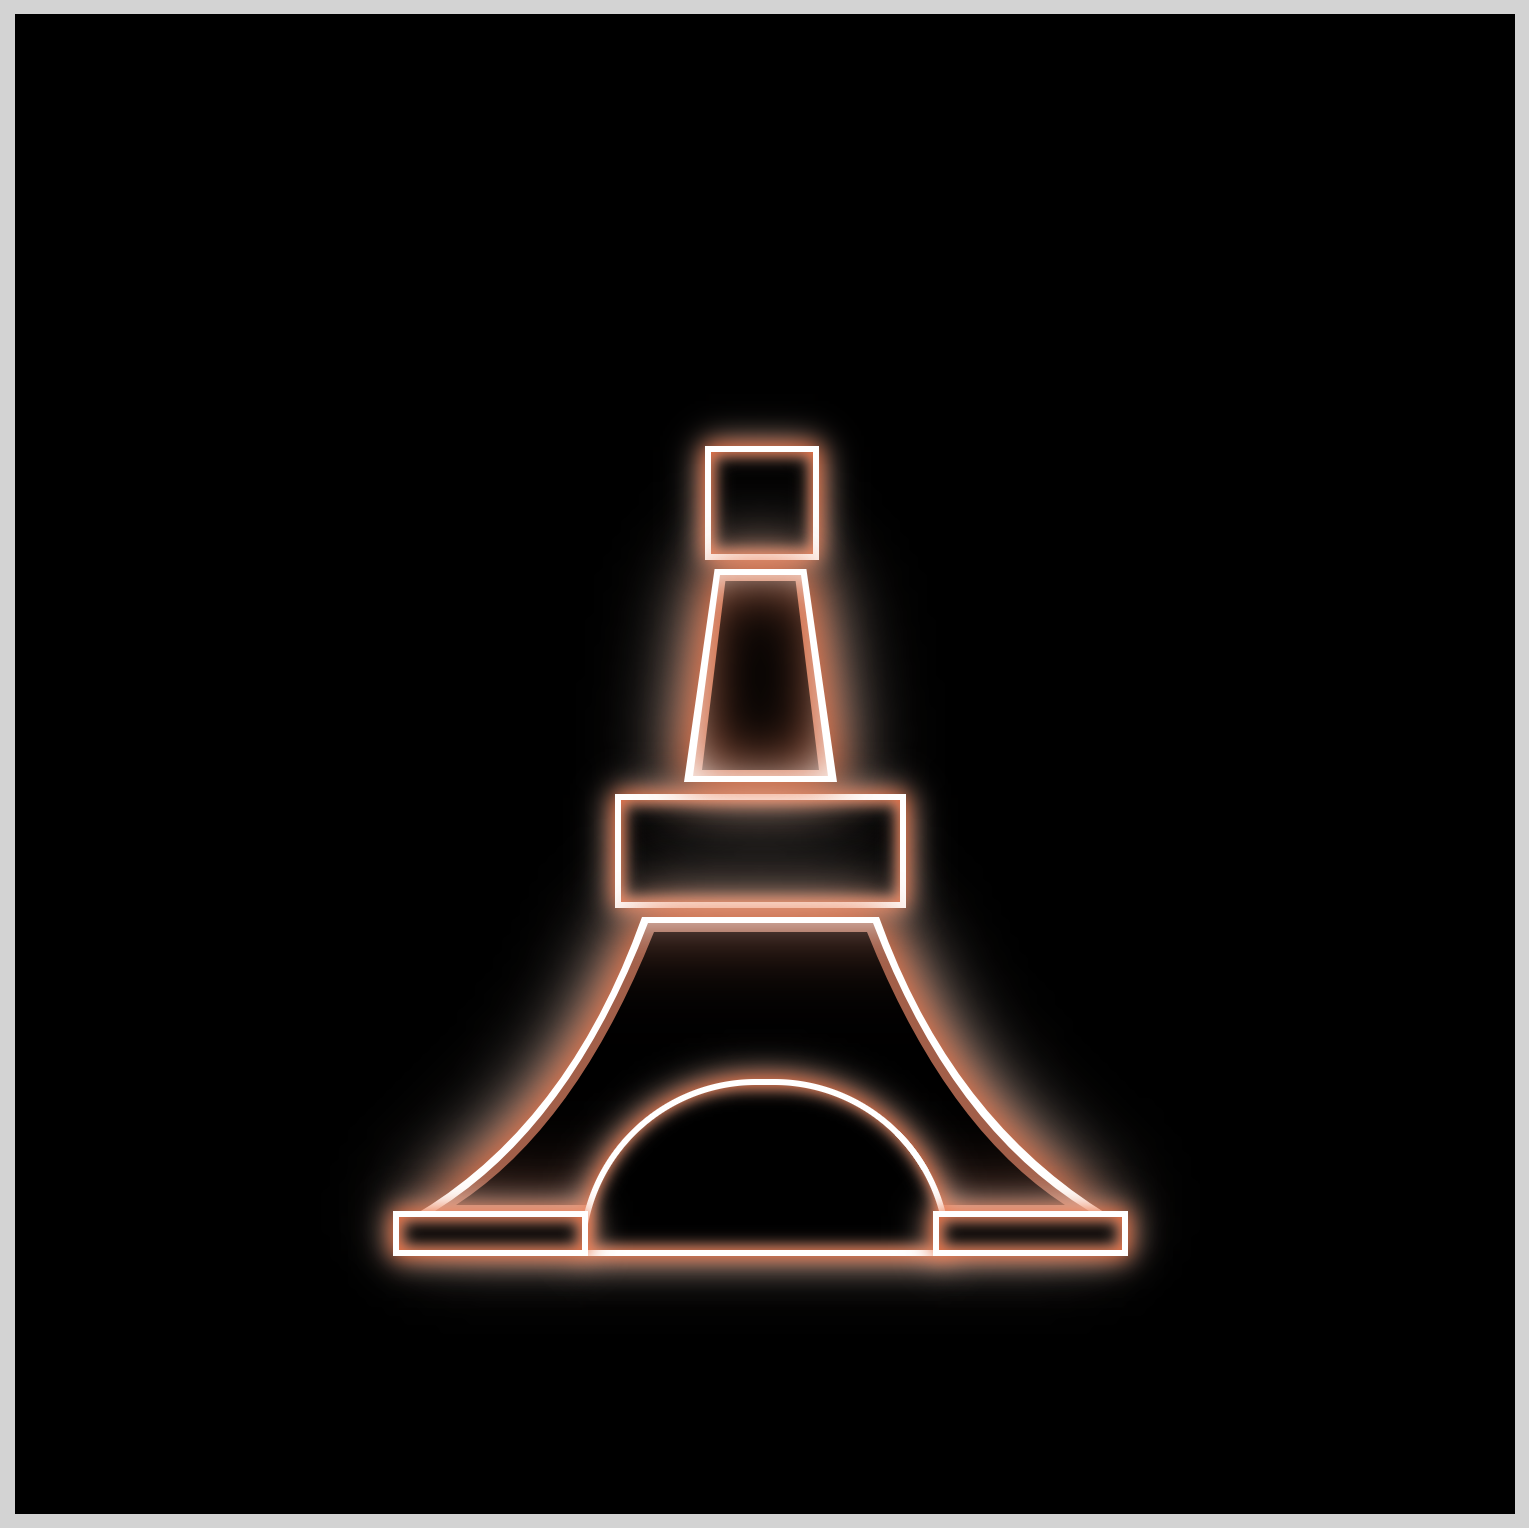 CSS Animation – Tokyo Tower Neon Sign